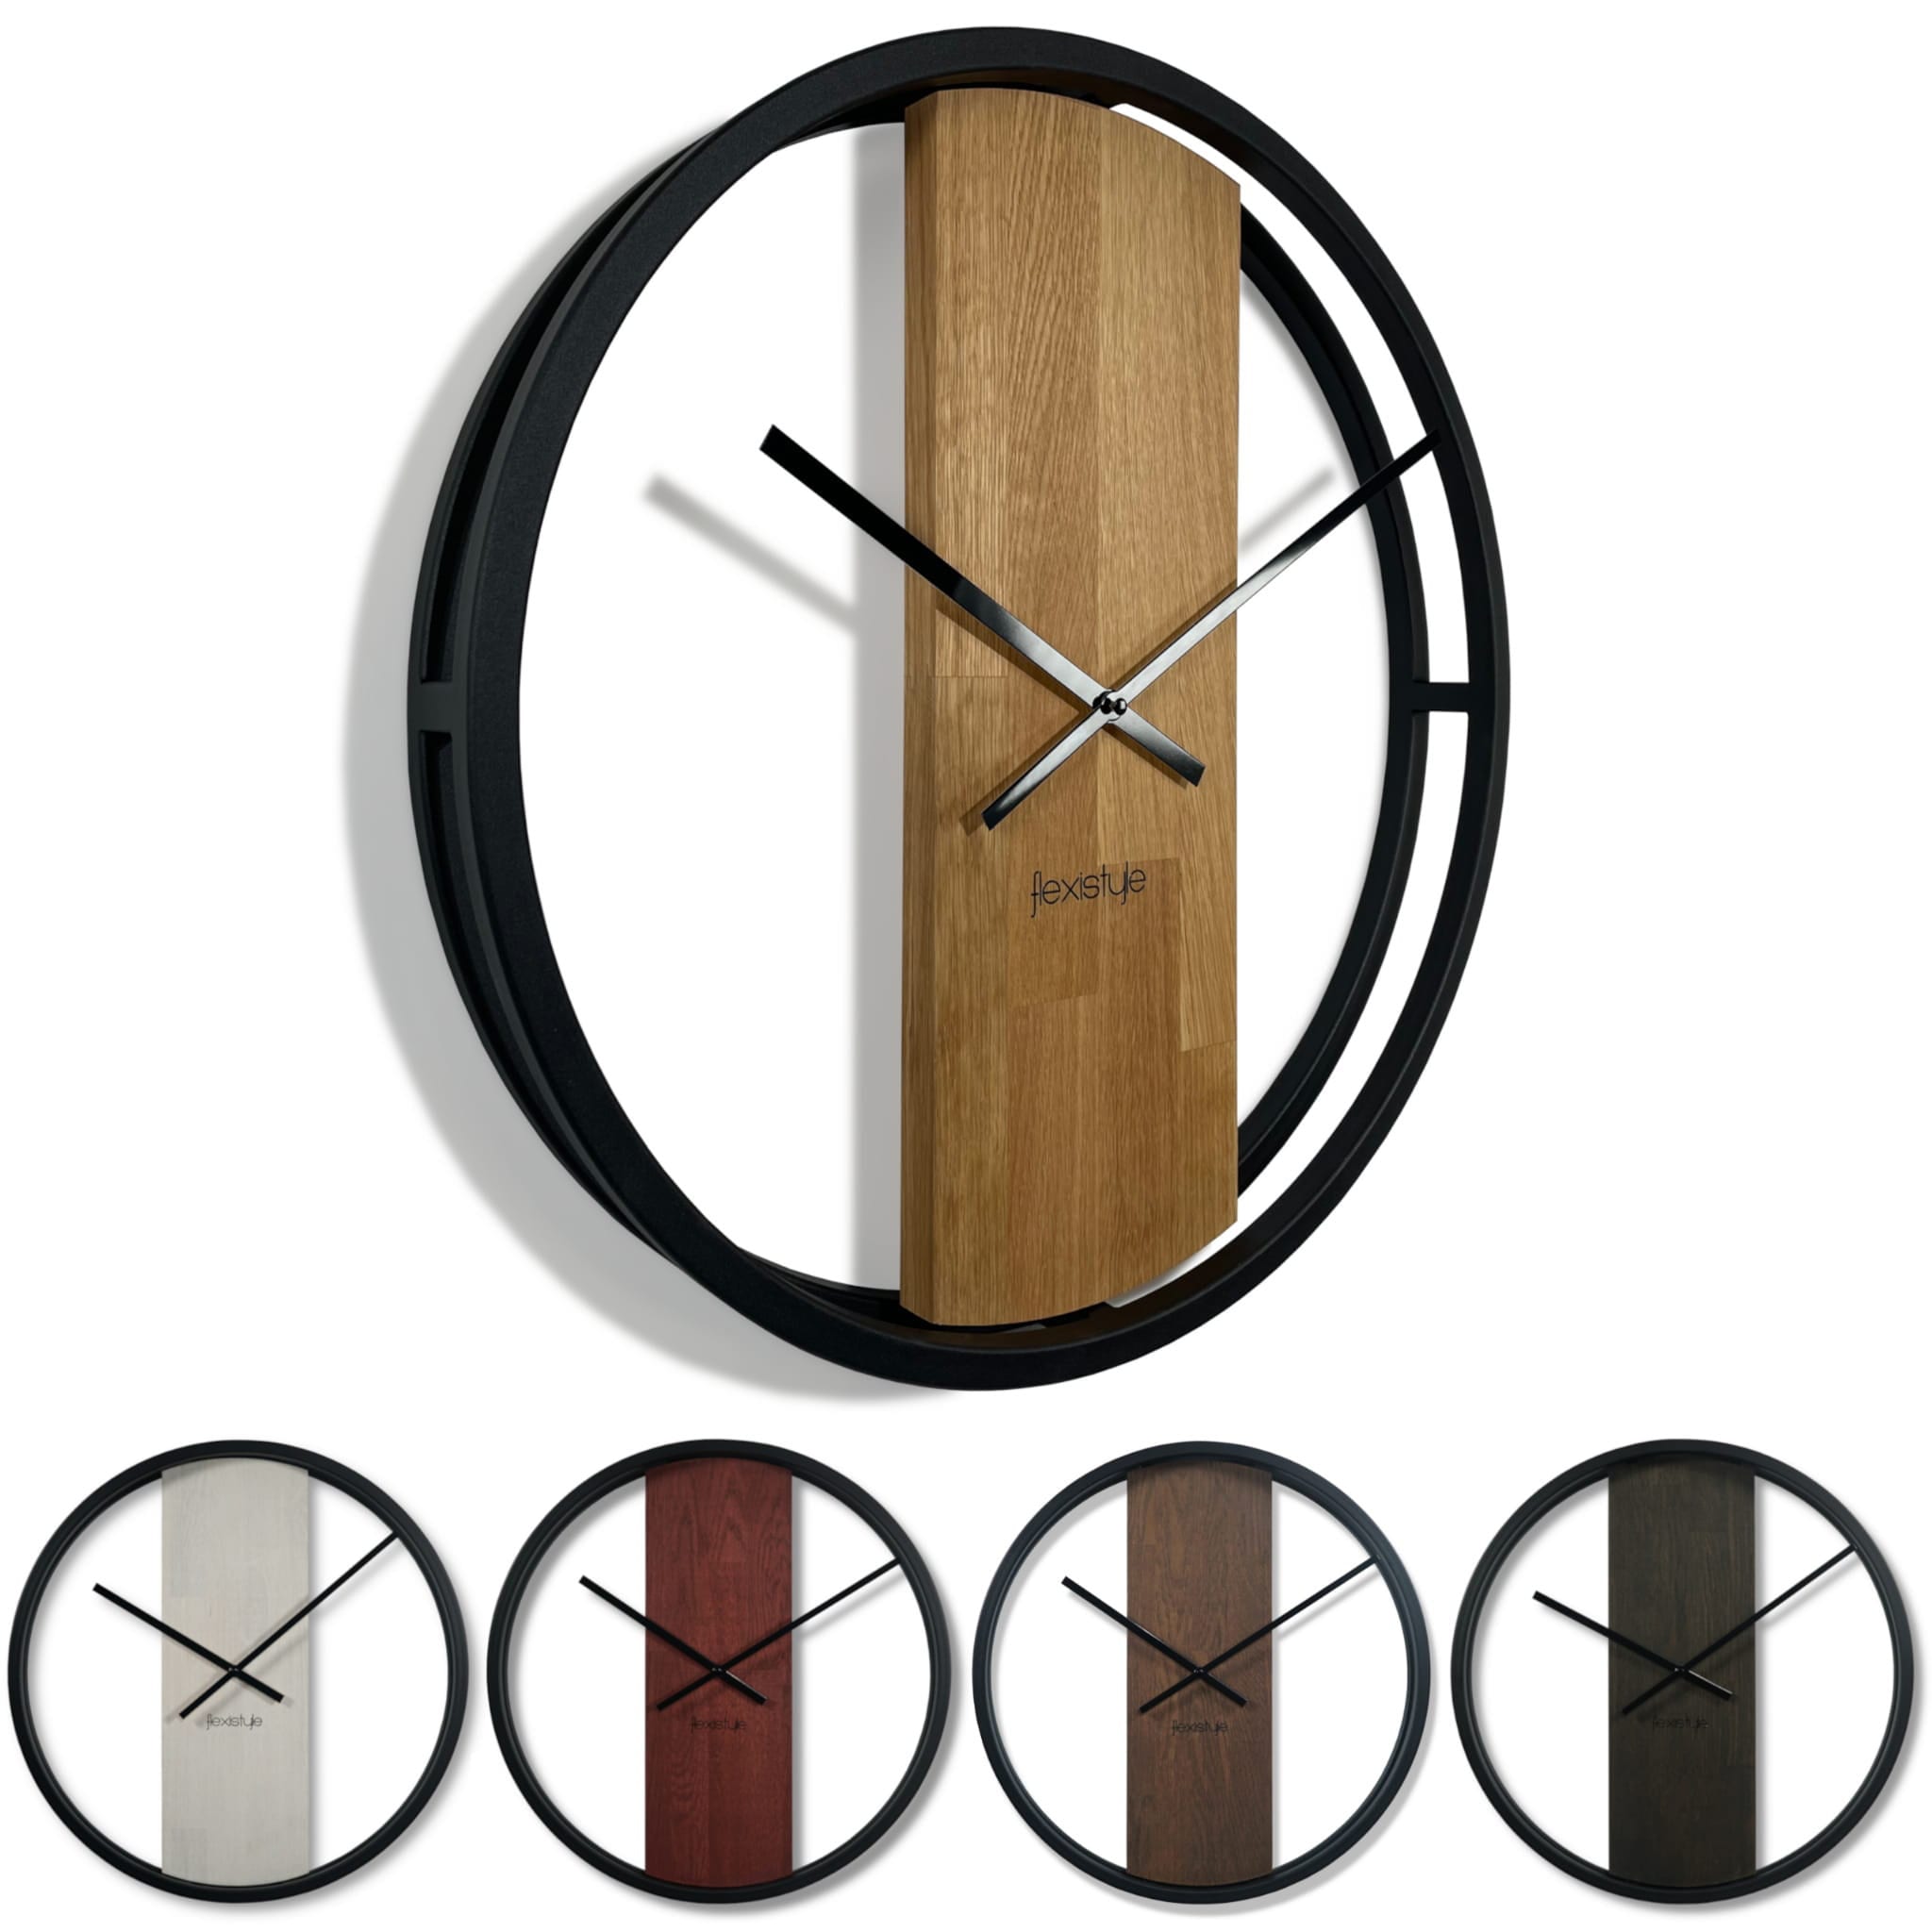 60cm / 24 Oversized Industrial Style Wall Clock, Big Round Wooden